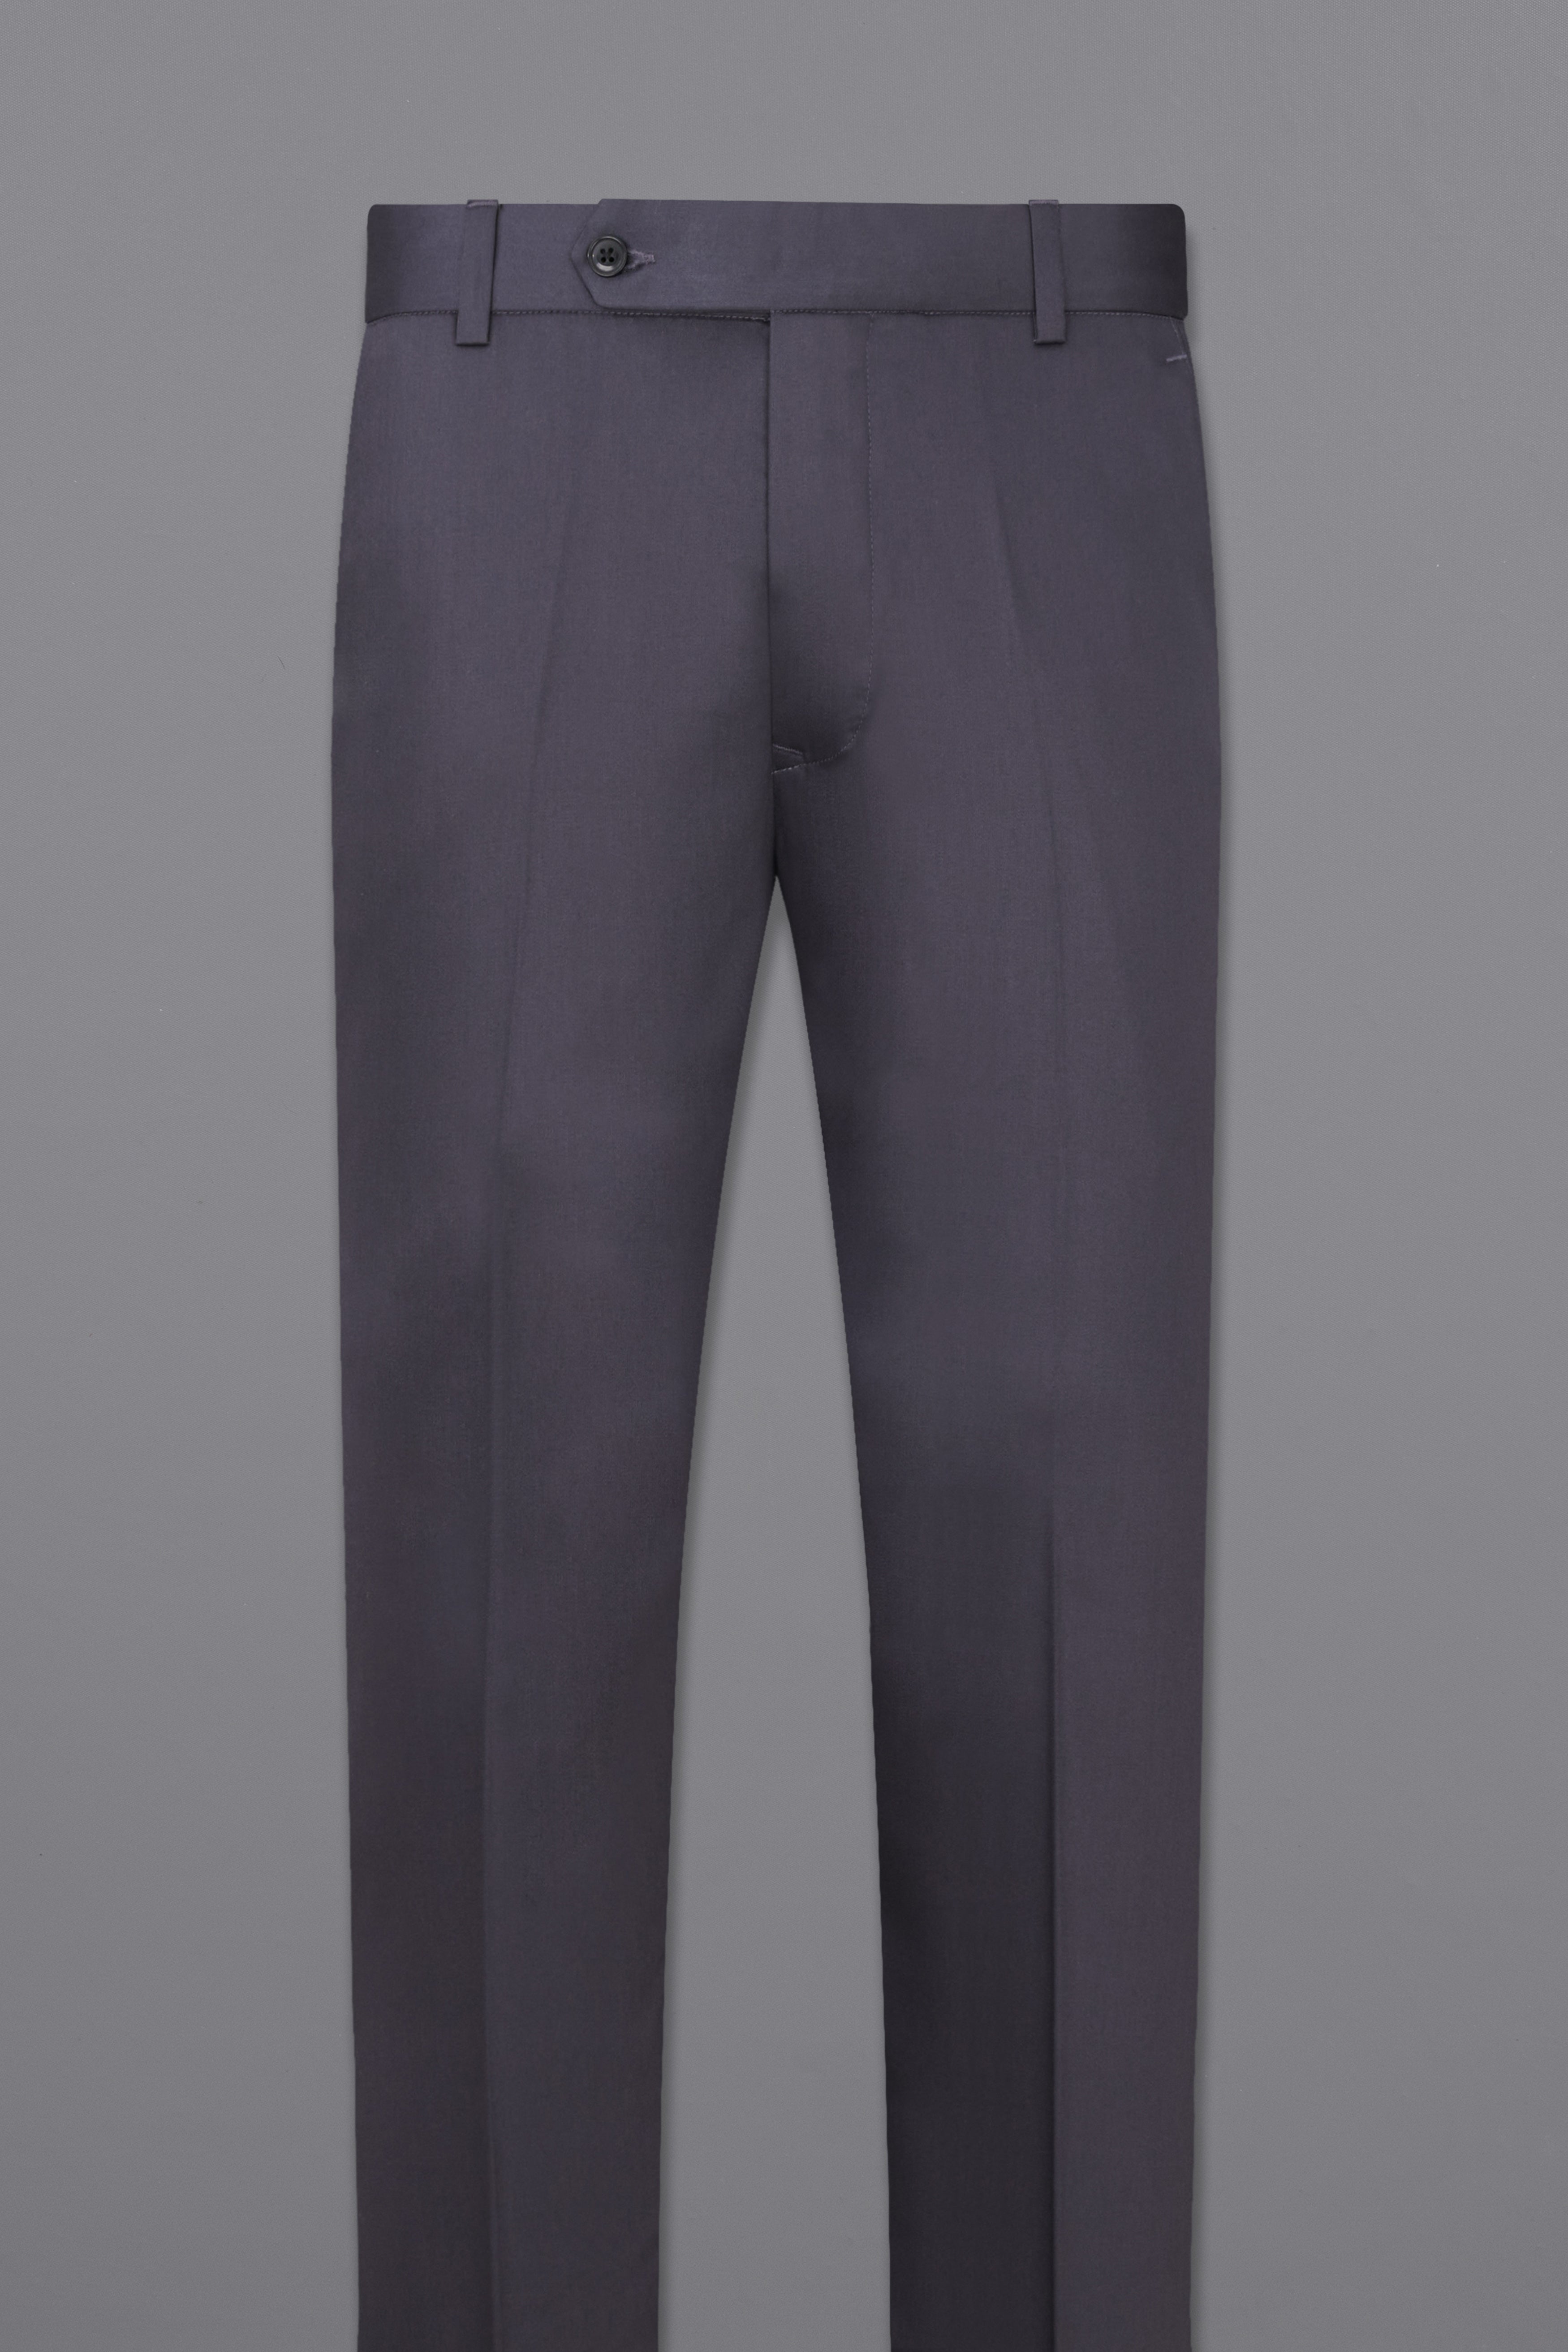 Buy Grey Trousers & Pants for Men by MCHENRY Online | Ajio.com